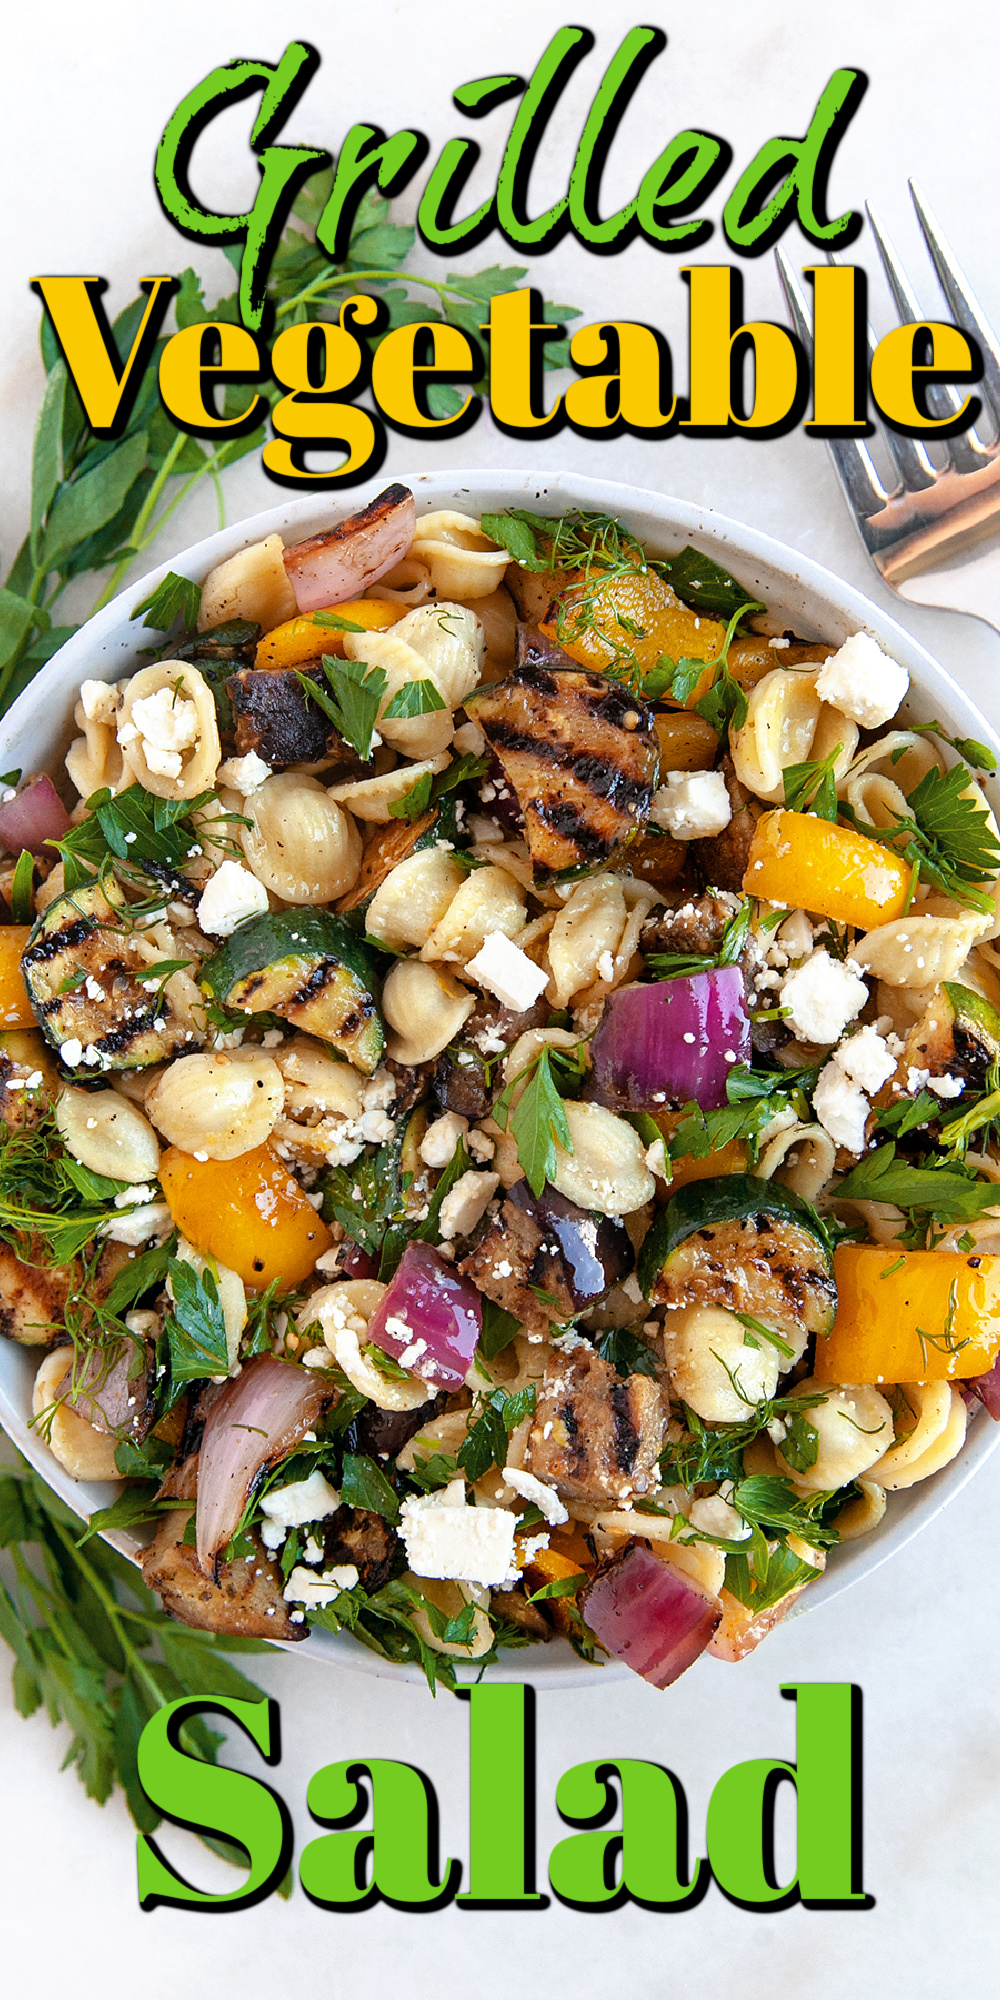 This Grilled Vegetable Salad with orecchiette pasta is a real show-stopper! The lightly charred veggies, together with the texture of the orecchiette pasta and the zing from the homemade dressing, combined to make this one outstanding salad!